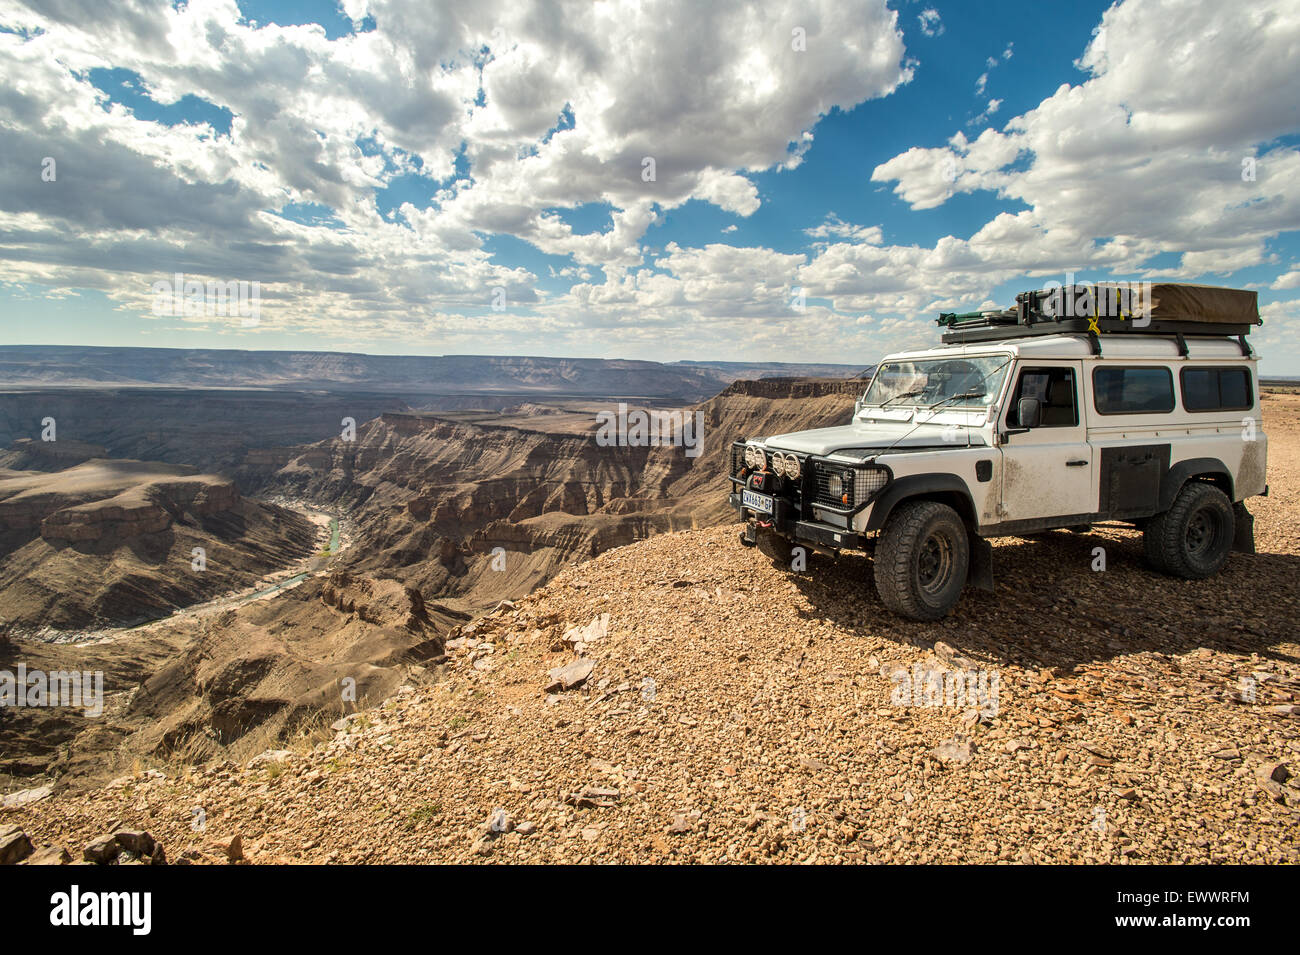 Namibia, Africa - Land Rover parked next to the Fish River Canyon Stock Photo